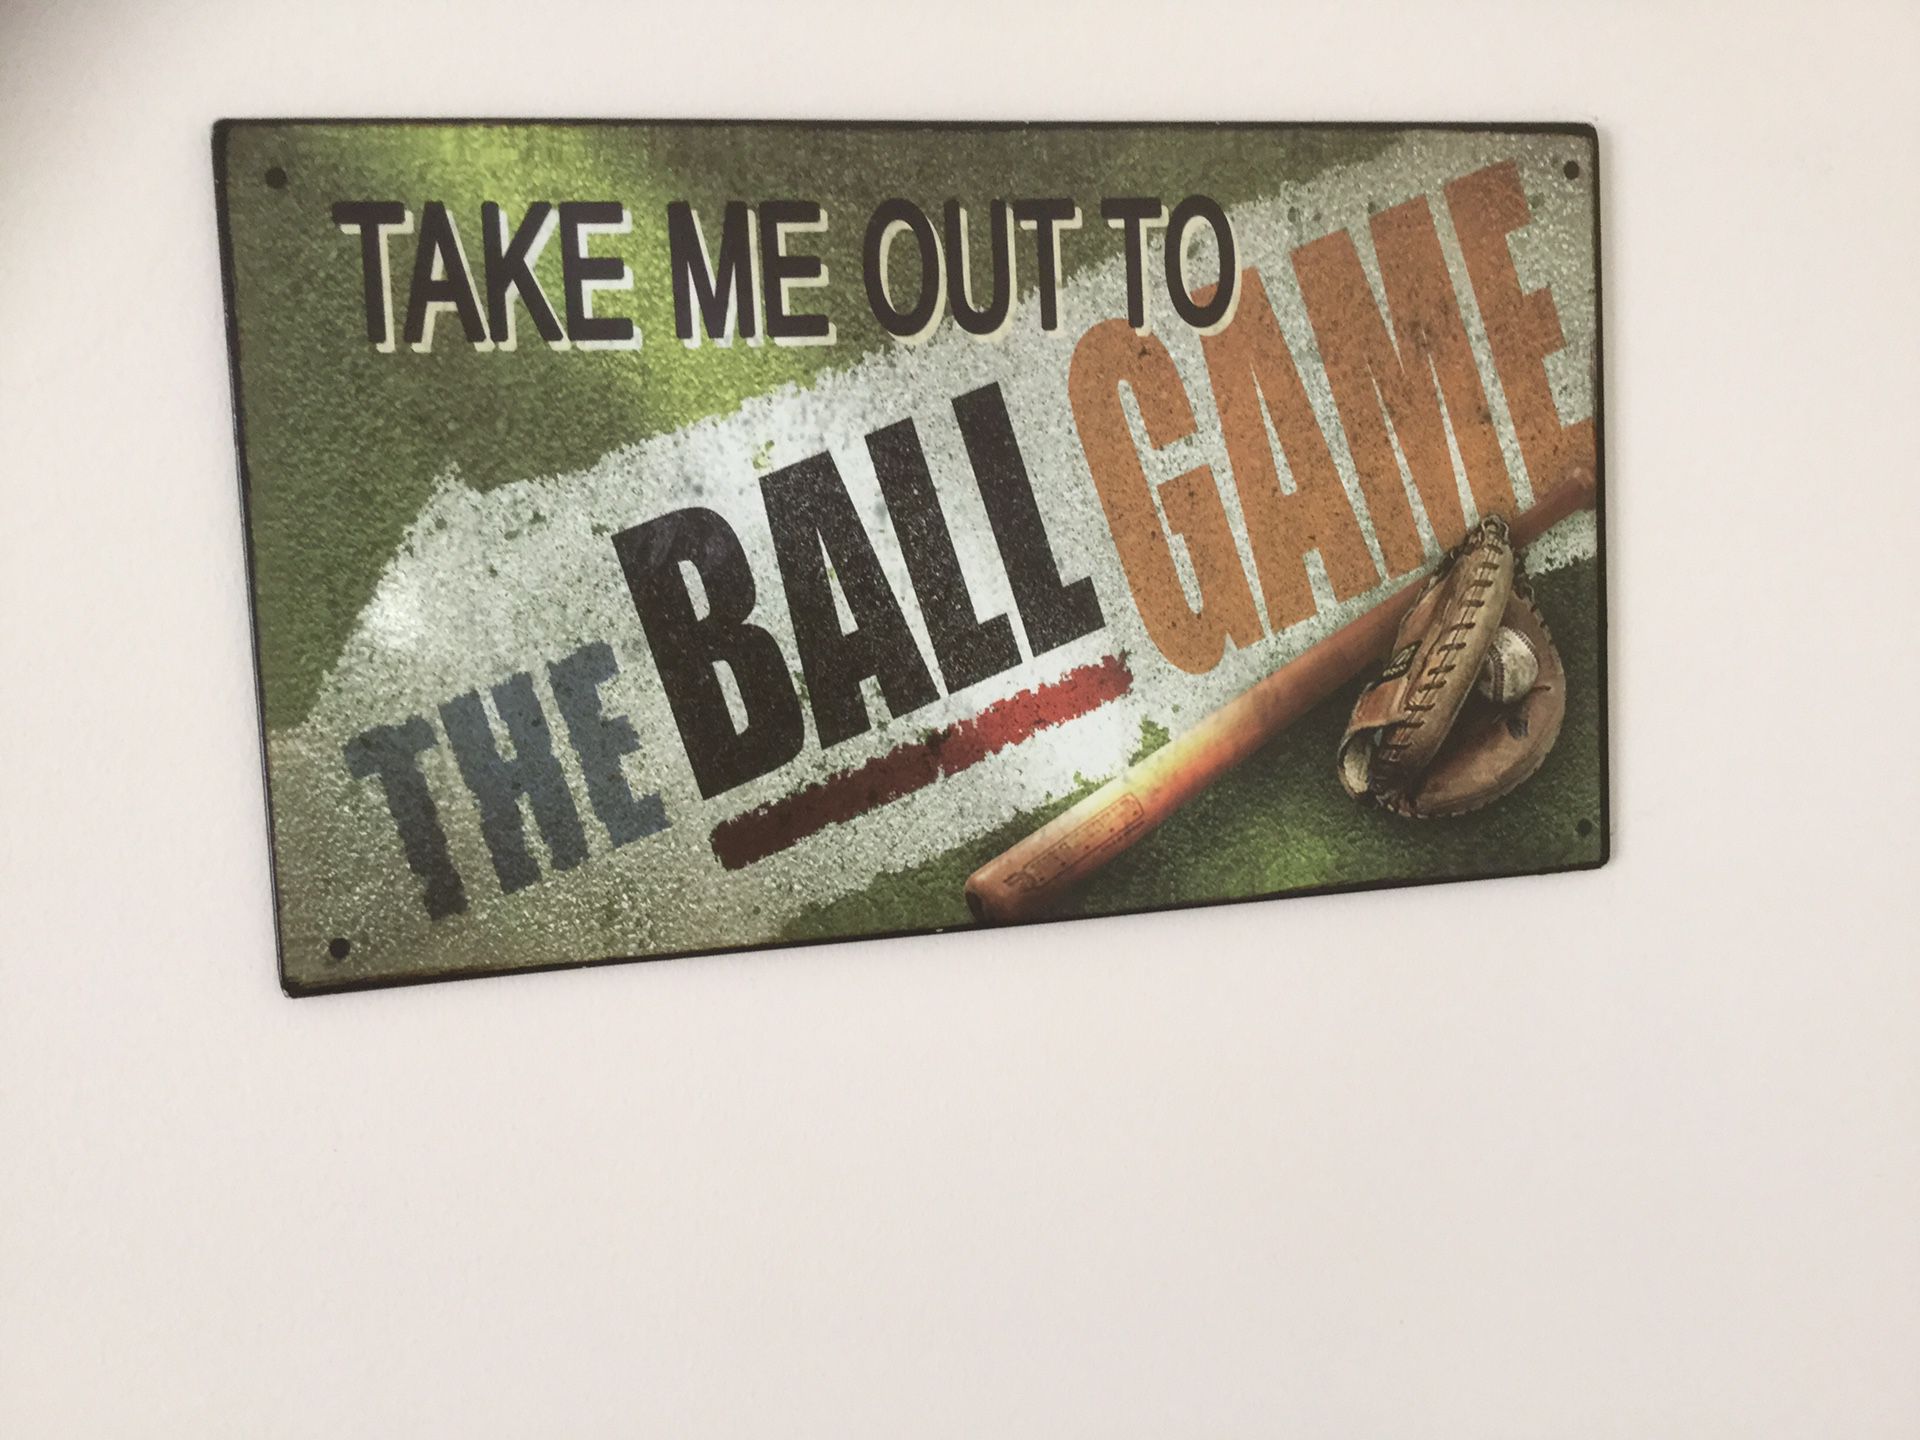 Take me out to the ball game wall decor